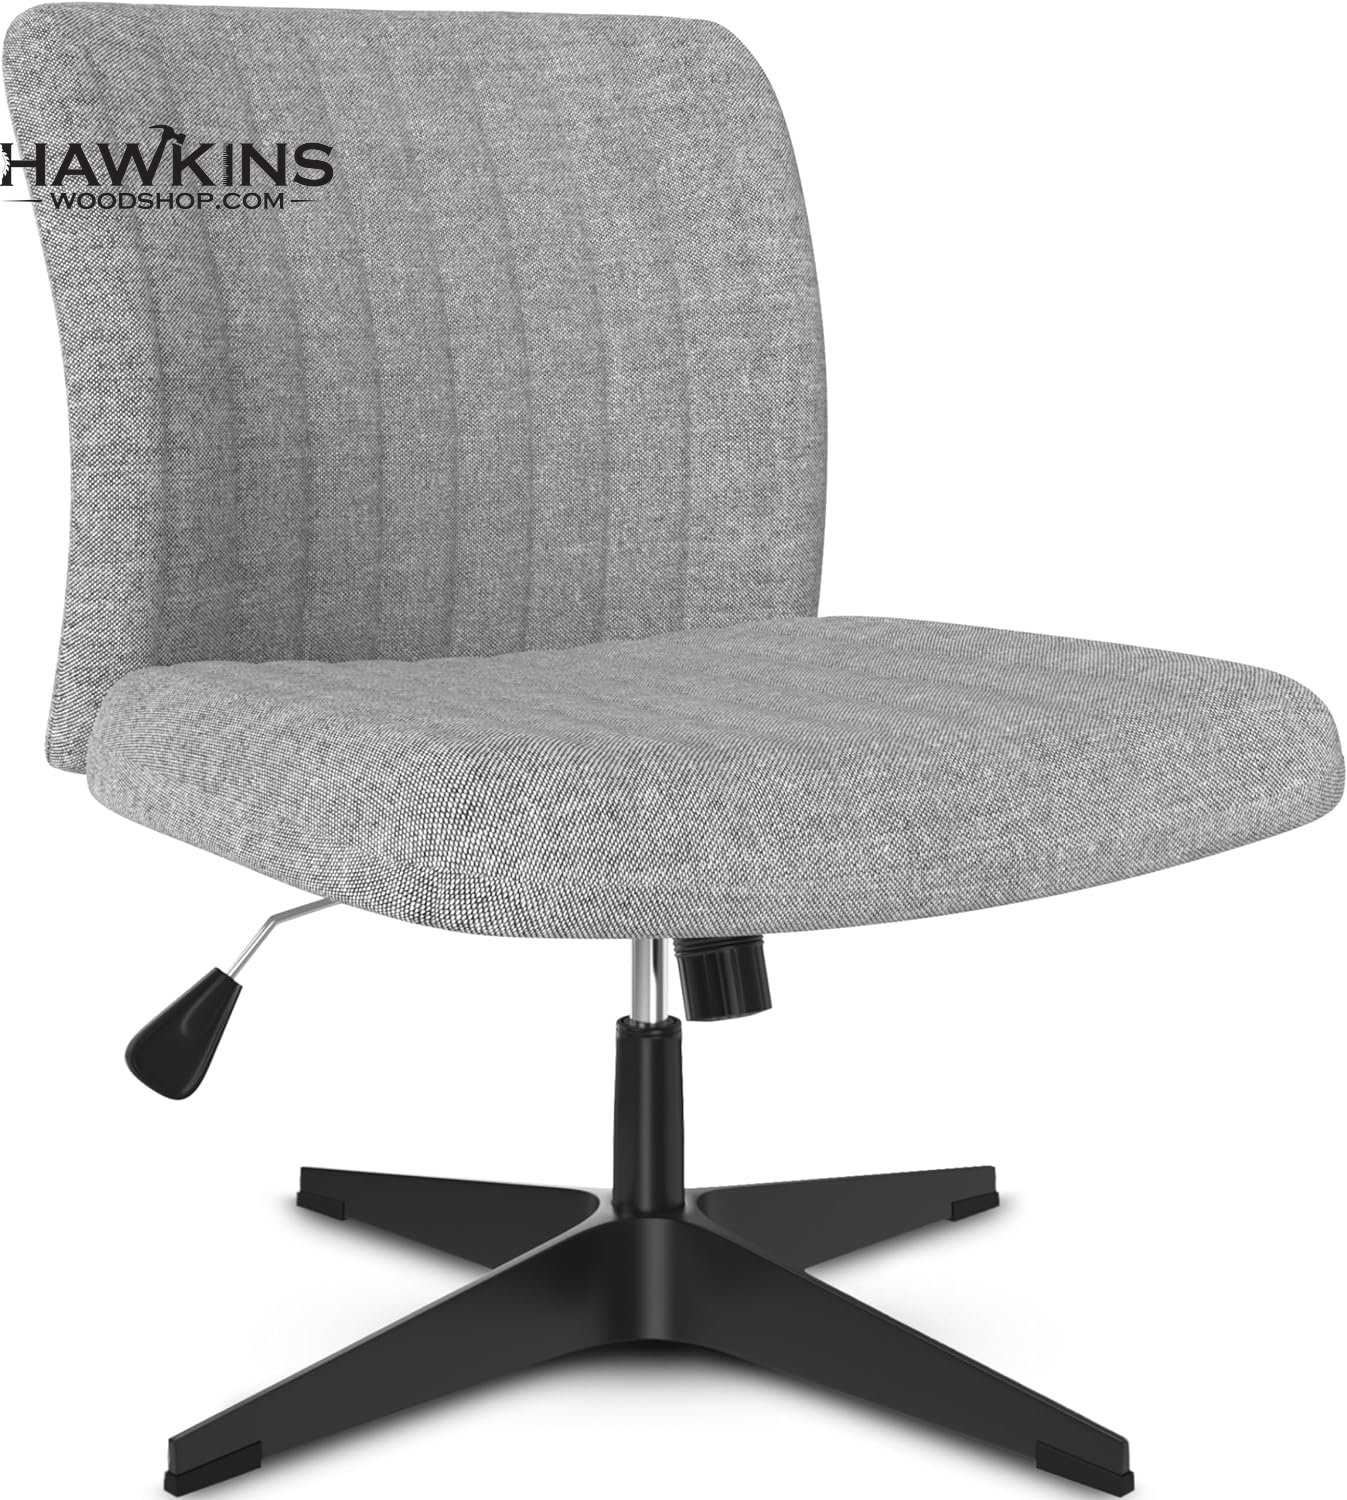 Armless Criss Cross Chair Comfy Office Chair with Lumbar Support Pillow  Home Office Desk Chair No Wheels Computer Chair Vanity Chair for Makeup  Room